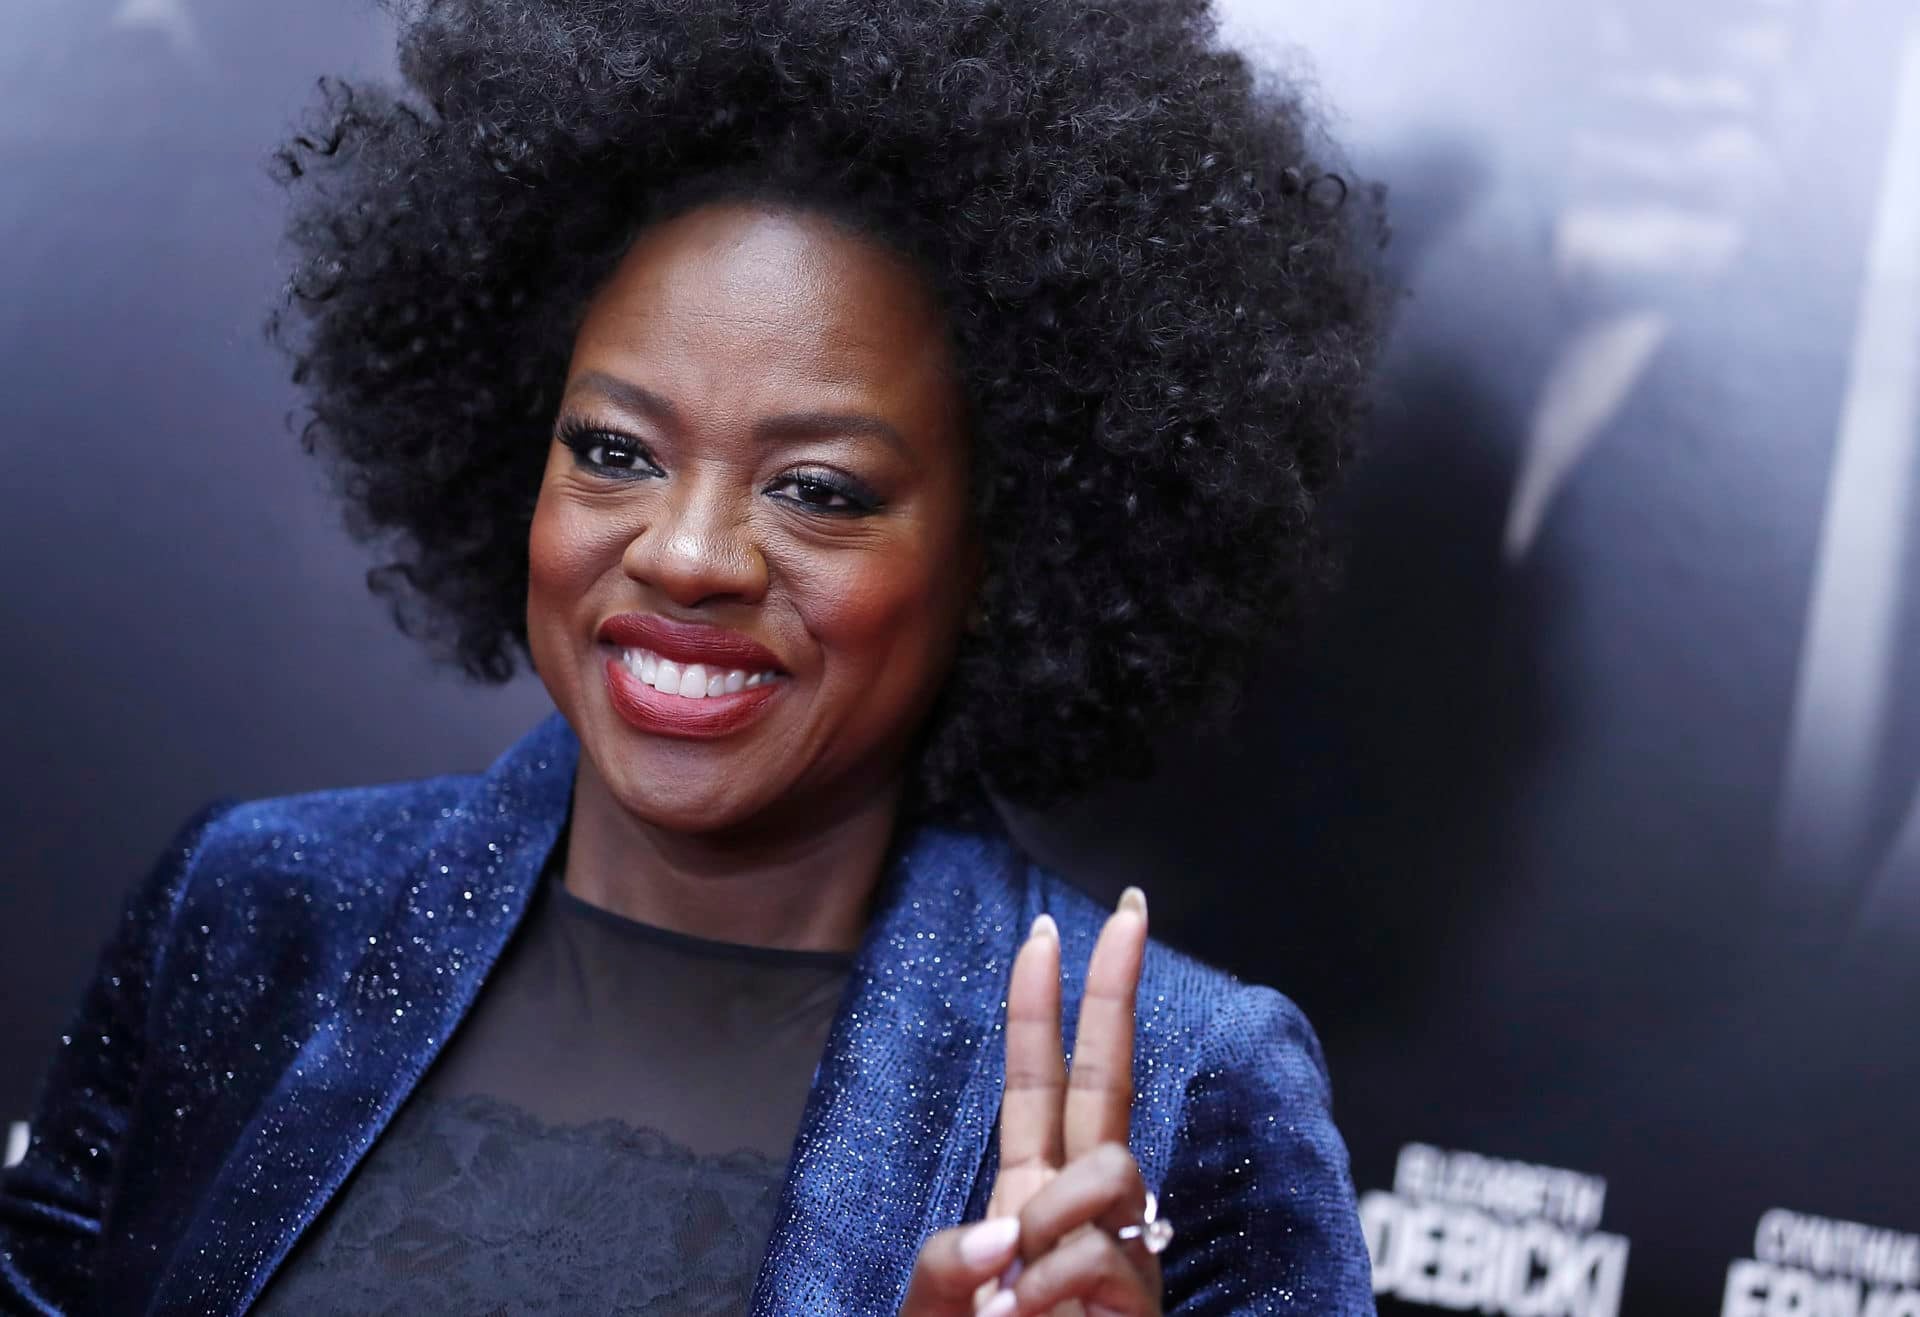 'Widows' Forces The Whole Cast To Listen To A Black Woman And Viola Davis Explains Why That's Important